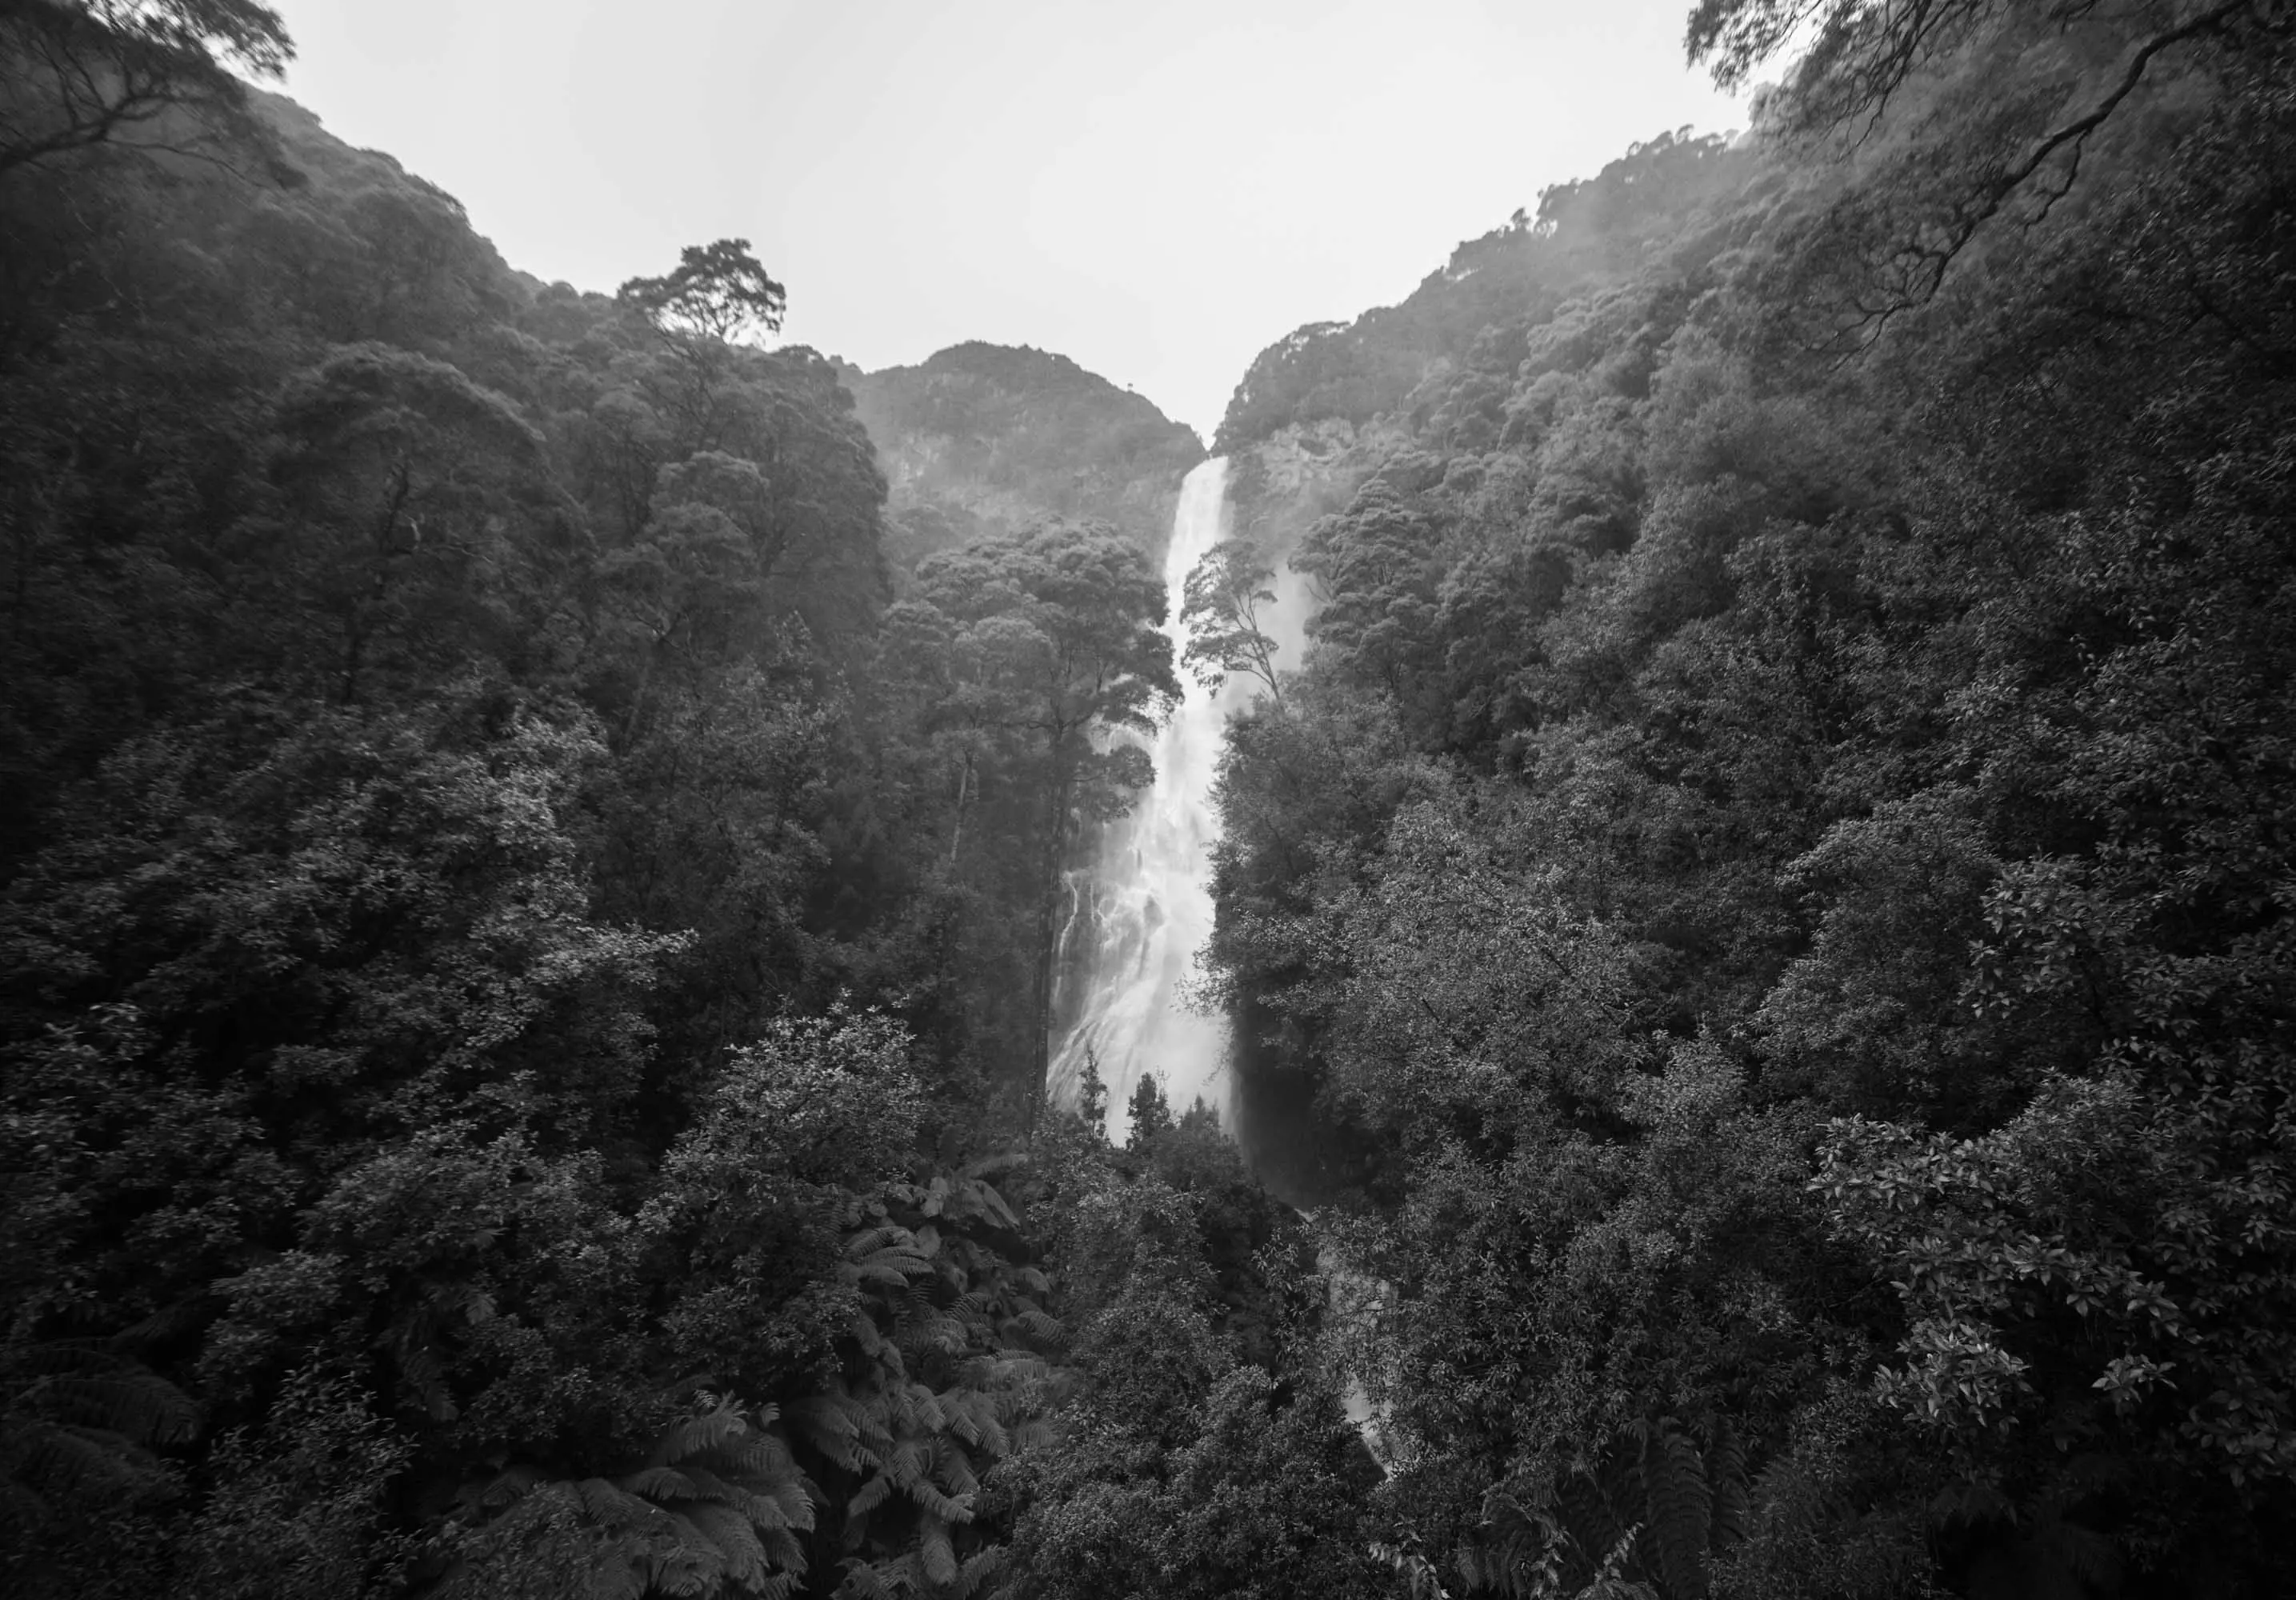 A tall waterfall cuts through dense forest from the top of a cliff.